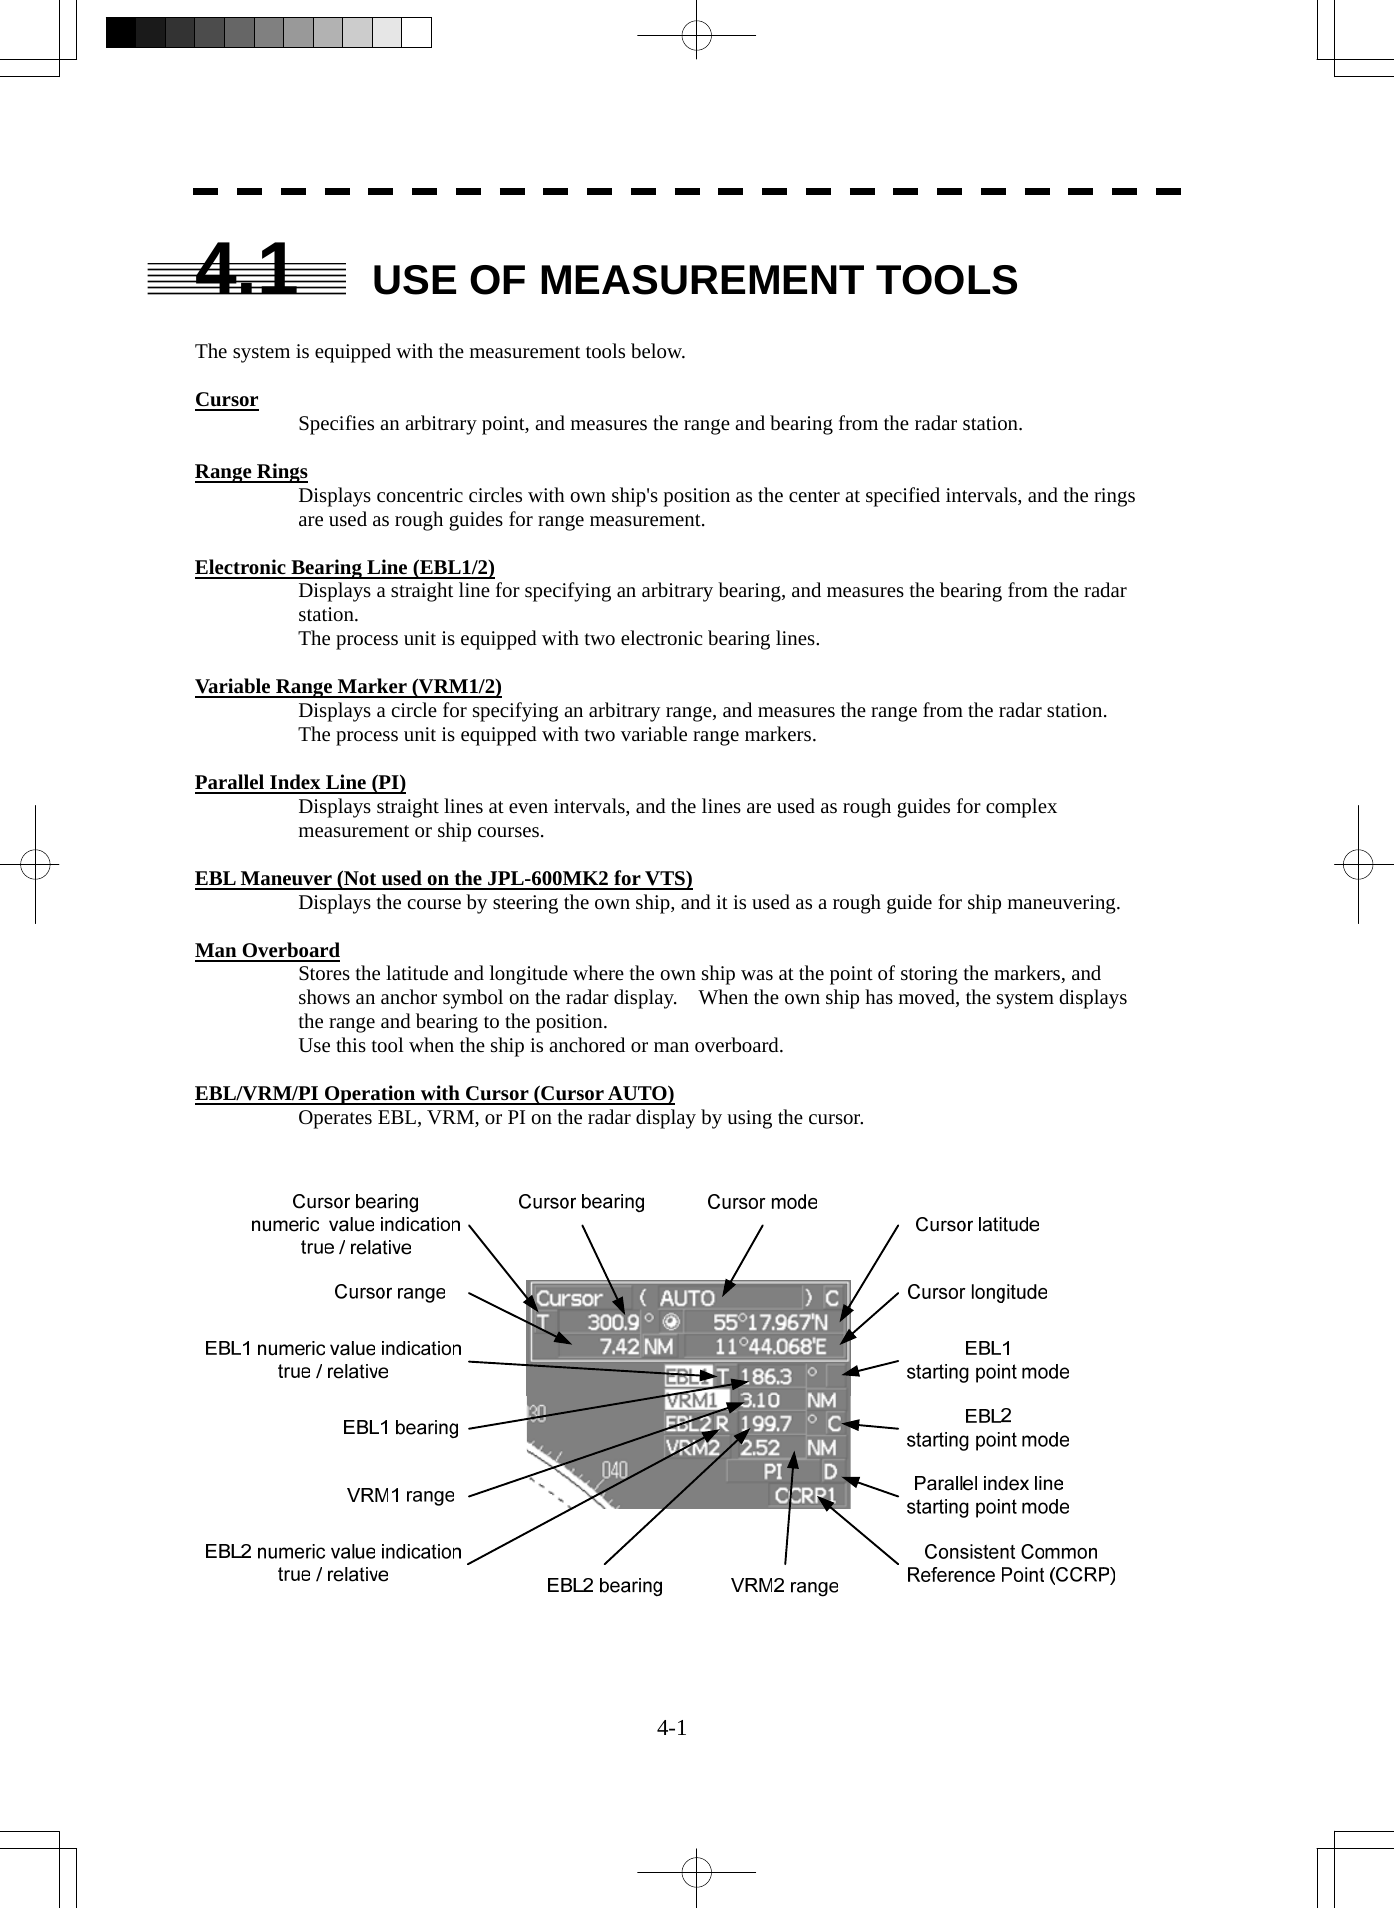  4-1 4.1  USE OF MEASUREMENT TOOLS  The system is equipped with the measurement tools below.  Cursor Specifies an arbitrary point, and measures the range and bearing from the radar station.  Range Rings Displays concentric circles with own ship&apos;s position as the center at specified intervals, and the rings are used as rough guides for range measurement.  Electronic Bearing Line (EBL1/2) Displays a straight line for specifying an arbitrary bearing, and measures the bearing from the radar station. The process unit is equipped with two electronic bearing lines.  Variable Range Marker (VRM1/2) Displays a circle for specifying an arbitrary range, and measures the range from the radar station. The process unit is equipped with two variable range markers.  Parallel Index Line (PI) Displays straight lines at even intervals, and the lines are used as rough guides for complex measurement or ship courses.  EBL Maneuver (Not used on the JPL-600MK2 for VTS) Displays the course by steering the own ship, and it is used as a rough guide for ship maneuvering.  Man Overboard Stores the latitude and longitude where the own ship was at the point of storing the markers, and shows an anchor symbol on the radar display.    When the own ship has moved, the system displays the range and bearing to the position. Use this tool when the ship is anchored or man overboard.  EBL/VRM/PI Operation with Cursor (Cursor AUTO) Operates EBL, VRM, or PI on the radar display by using the cursor.    